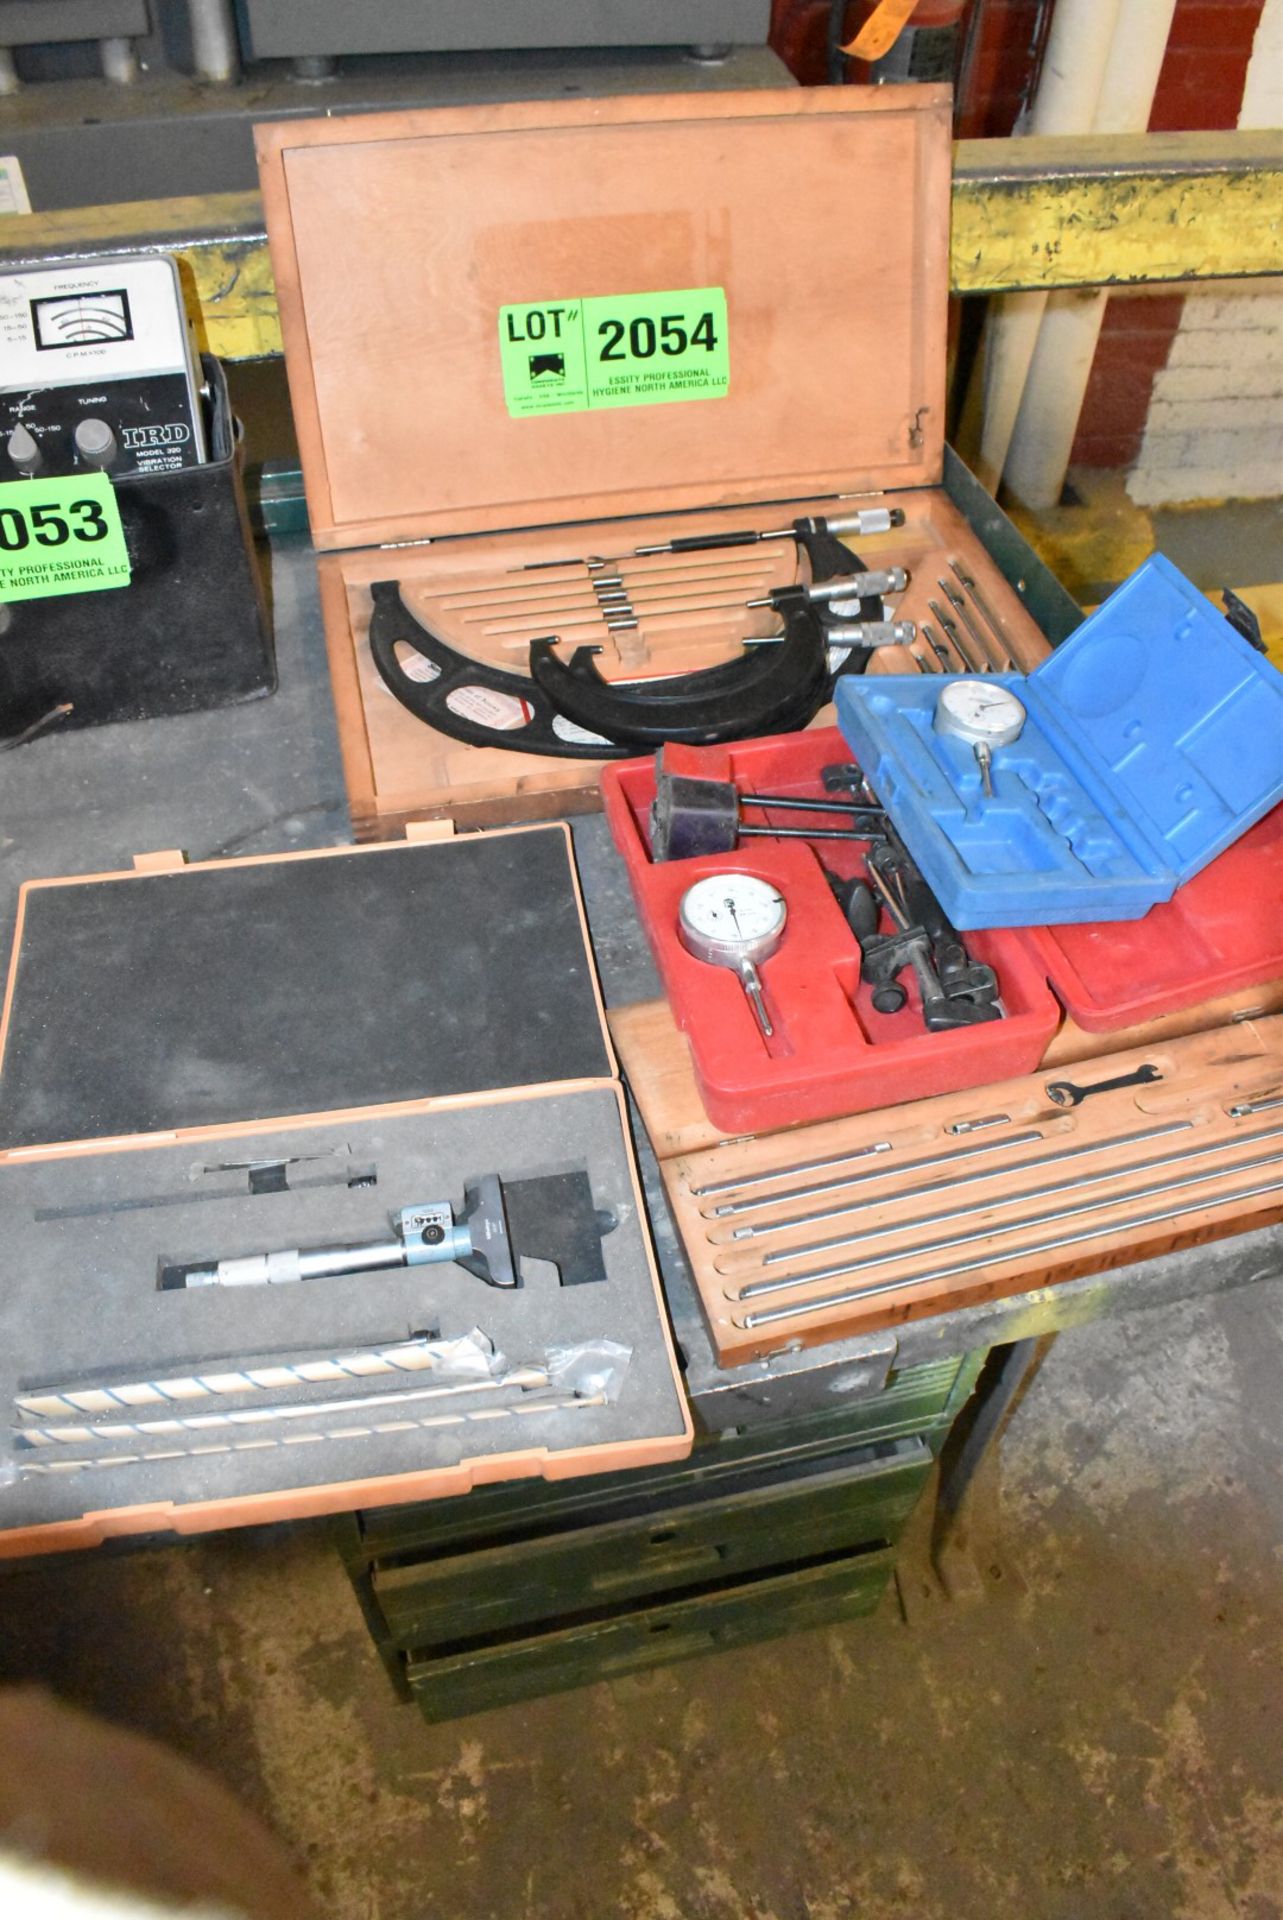 LOT/ INSPECTION EQUIPMENT [RIGGING FEES FOR LOT #2054 - $25 USD PLUS APPLICABLE TAXES]